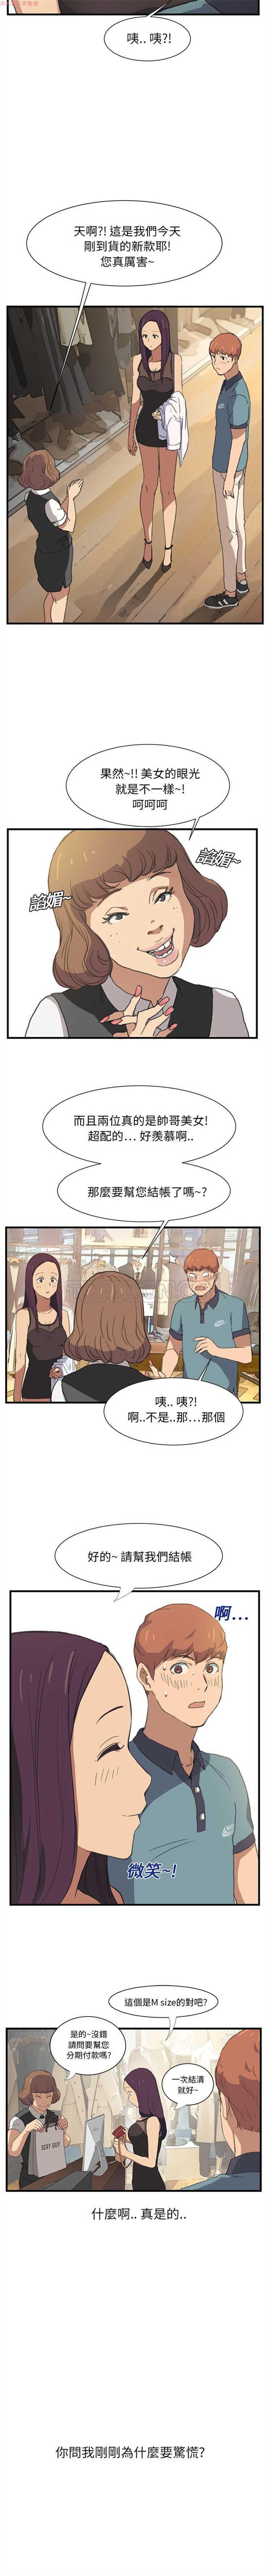 Work 继母 Chinese Stripper - Page 2